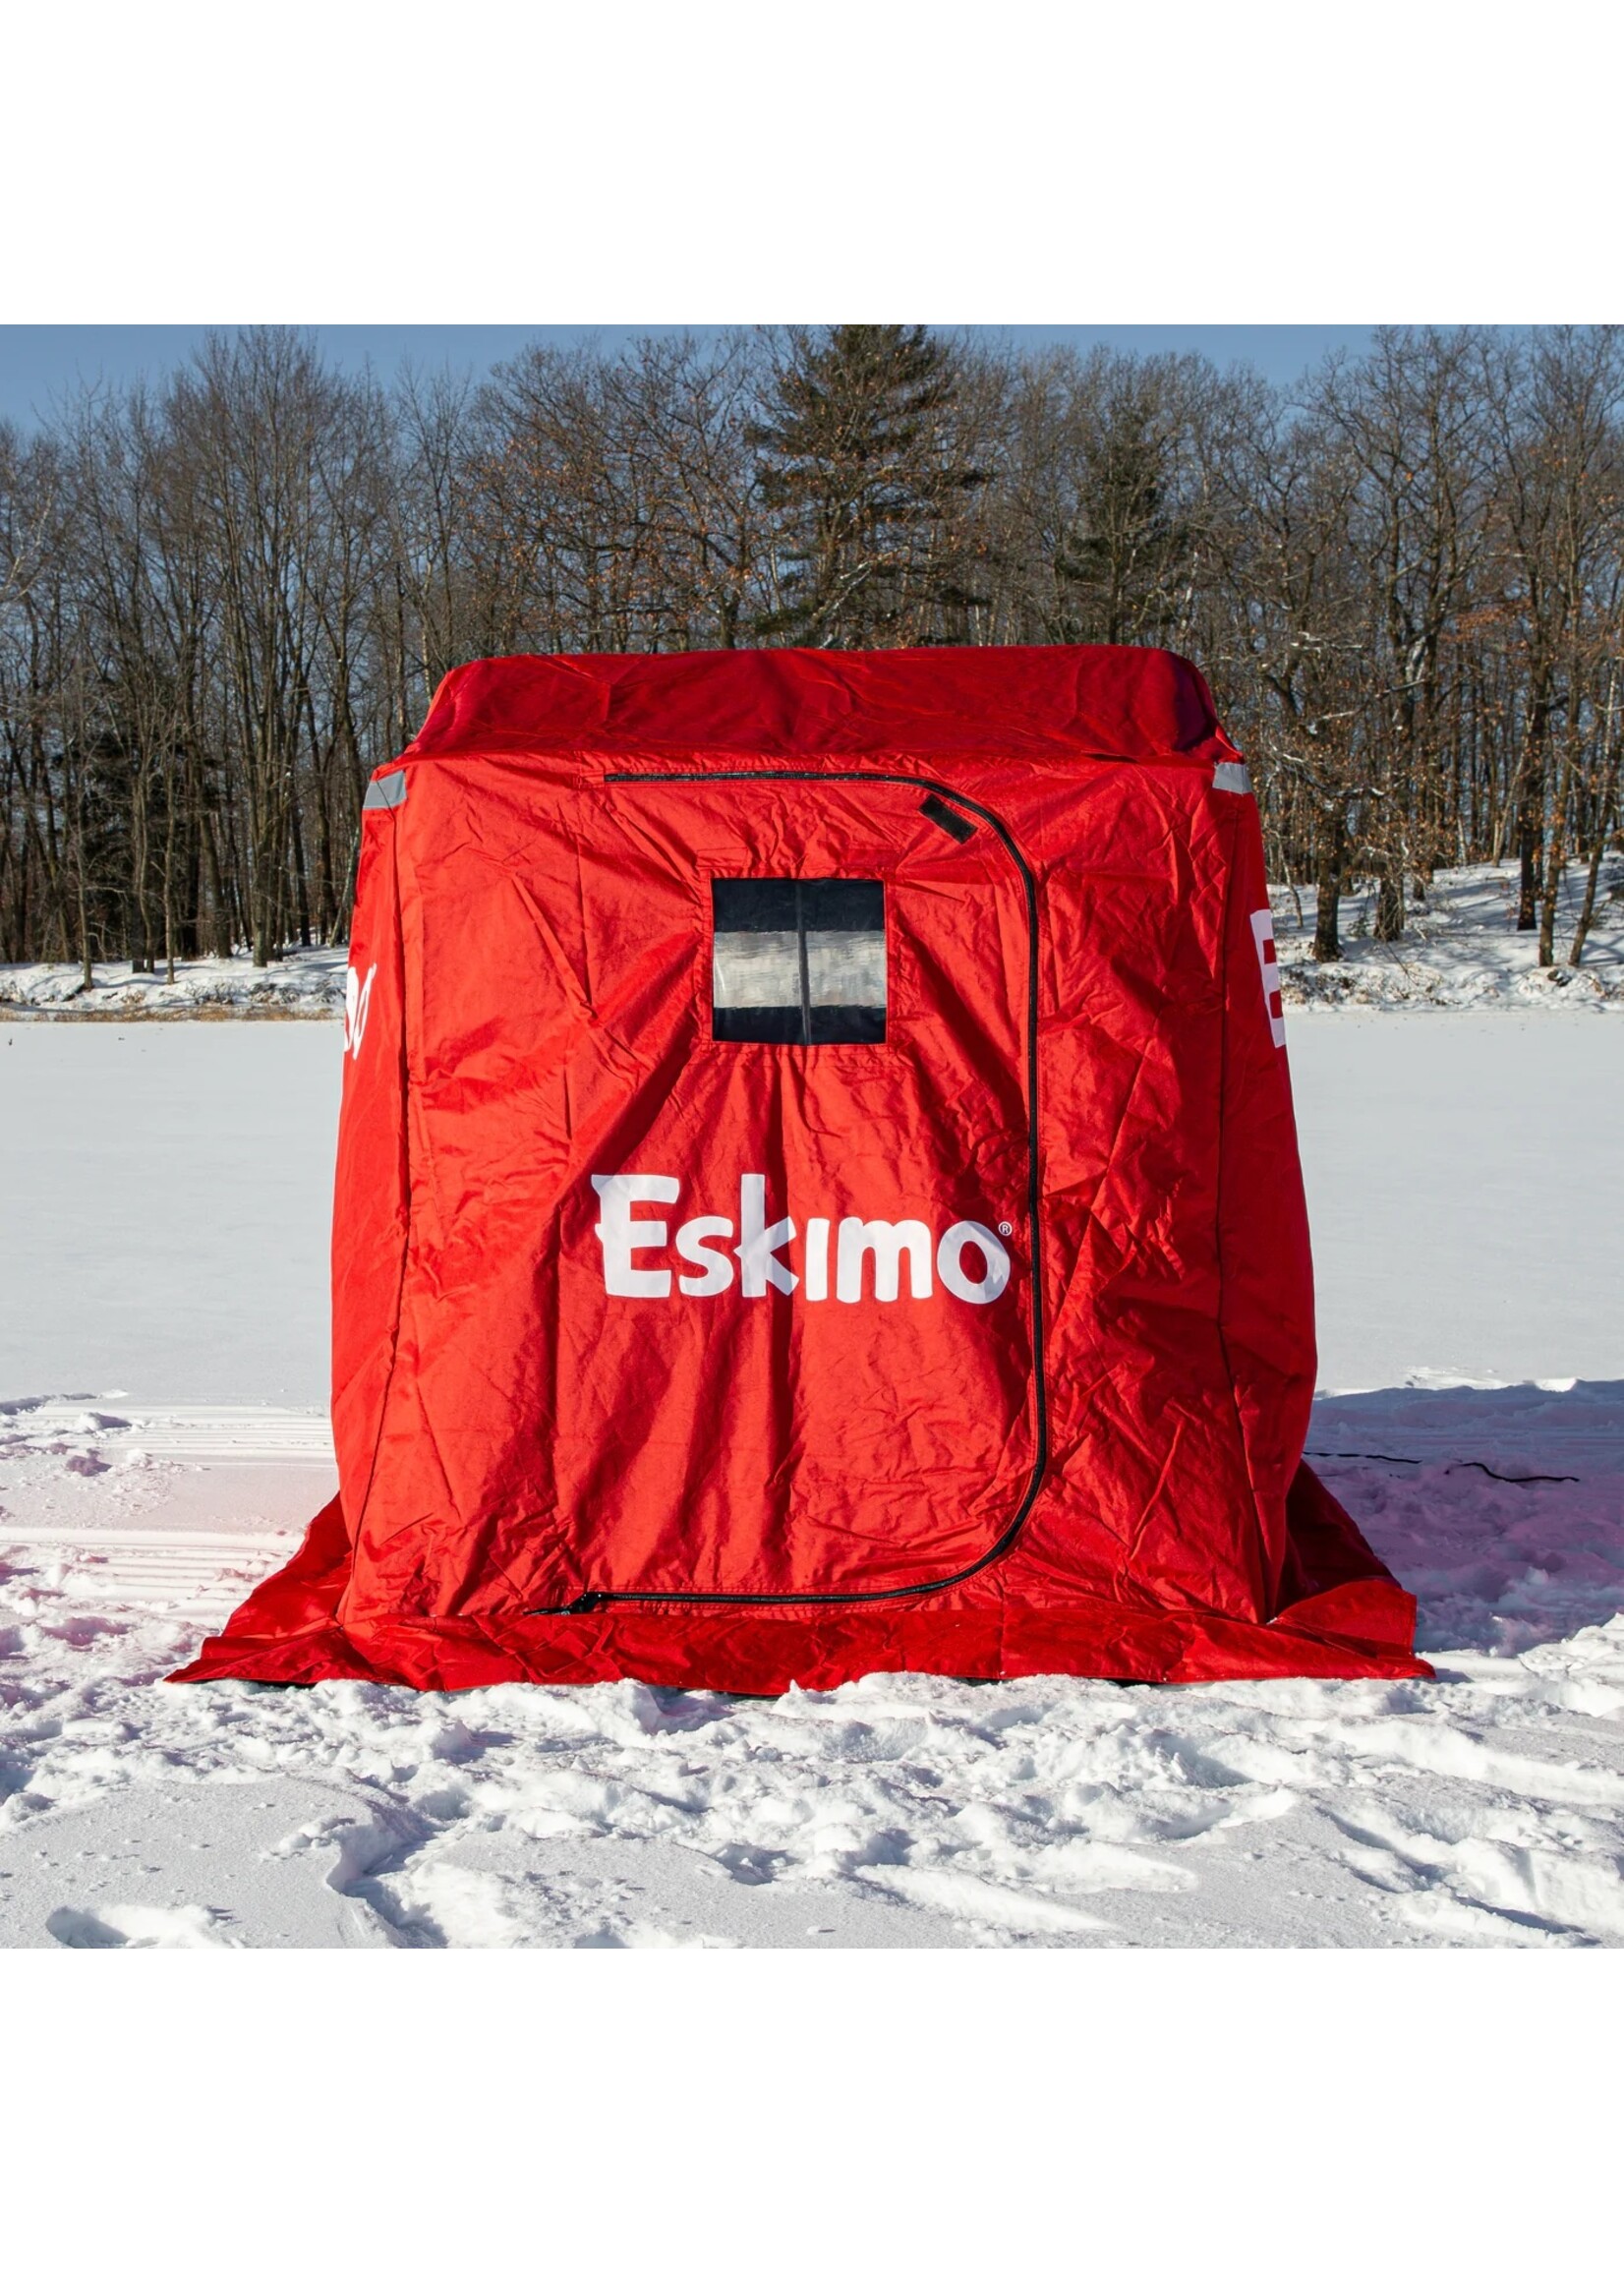 Eskimo Quickfish 2 Person Portable Pop Up Ice Fishing Tent House Shack Shelter, Red